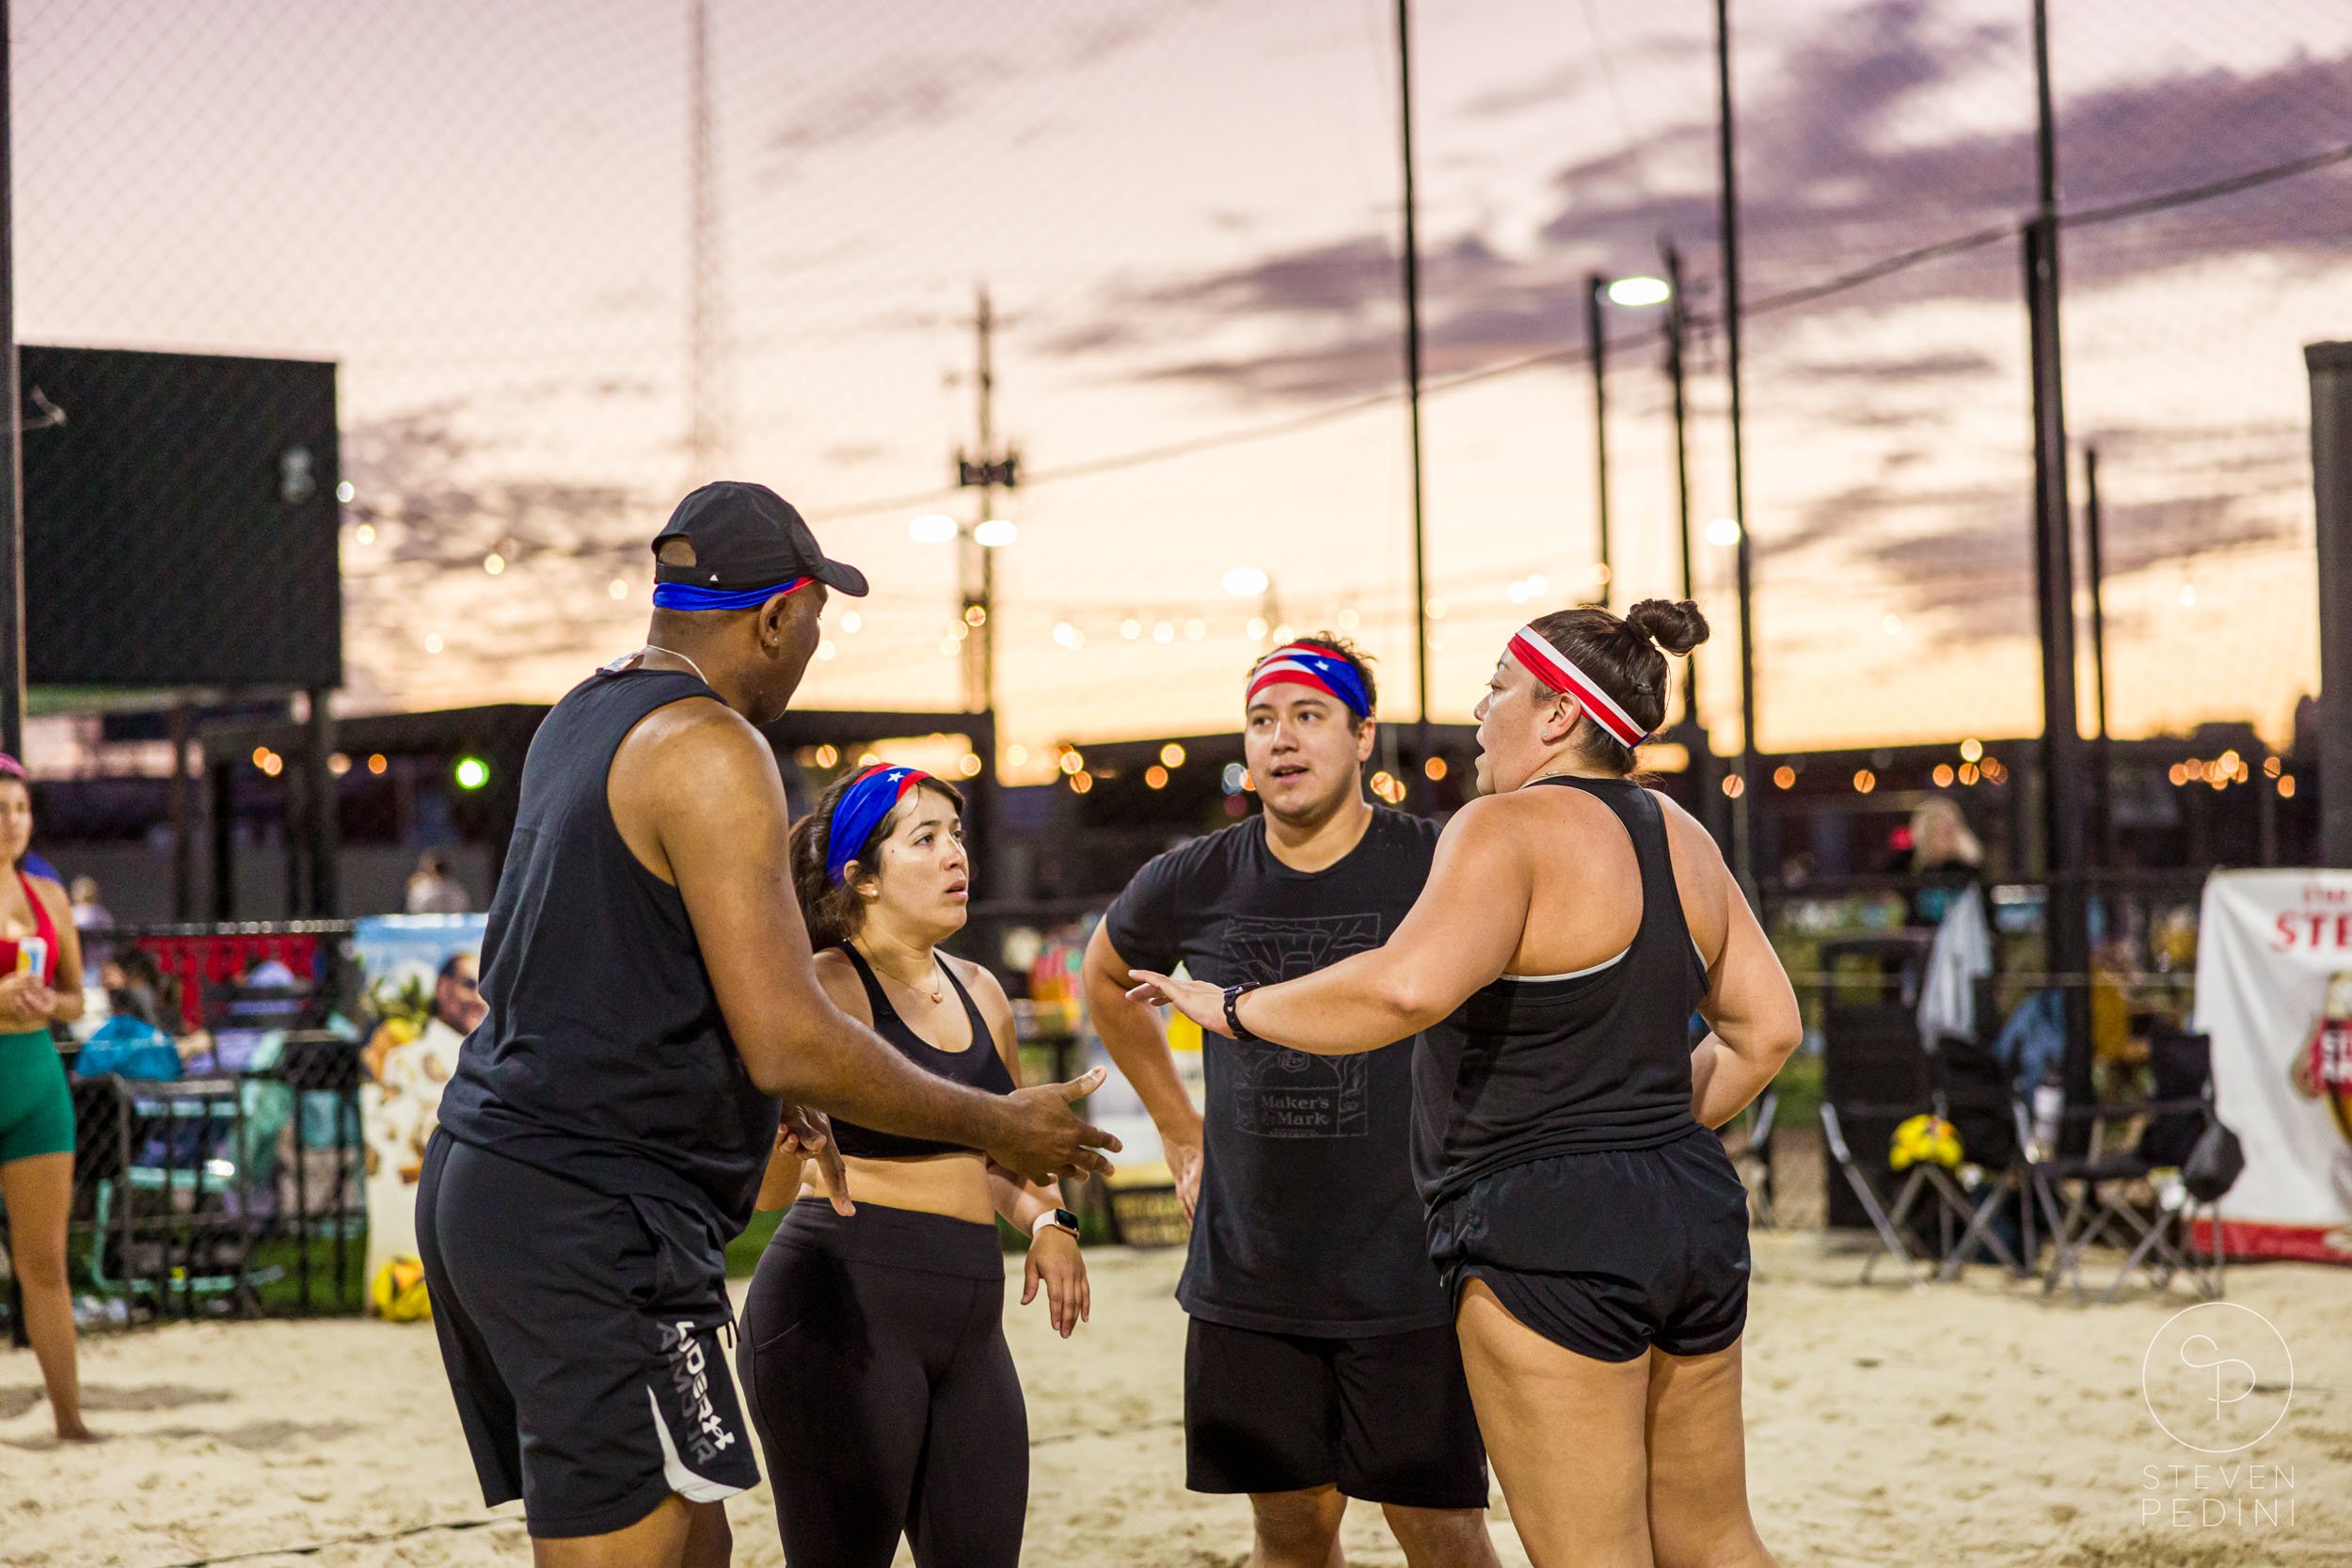 Steven Pedini Photography - Bumpy Pickle - Sand Volleyball - Houston TX - World Cup of Volleyball - 00307.jpg